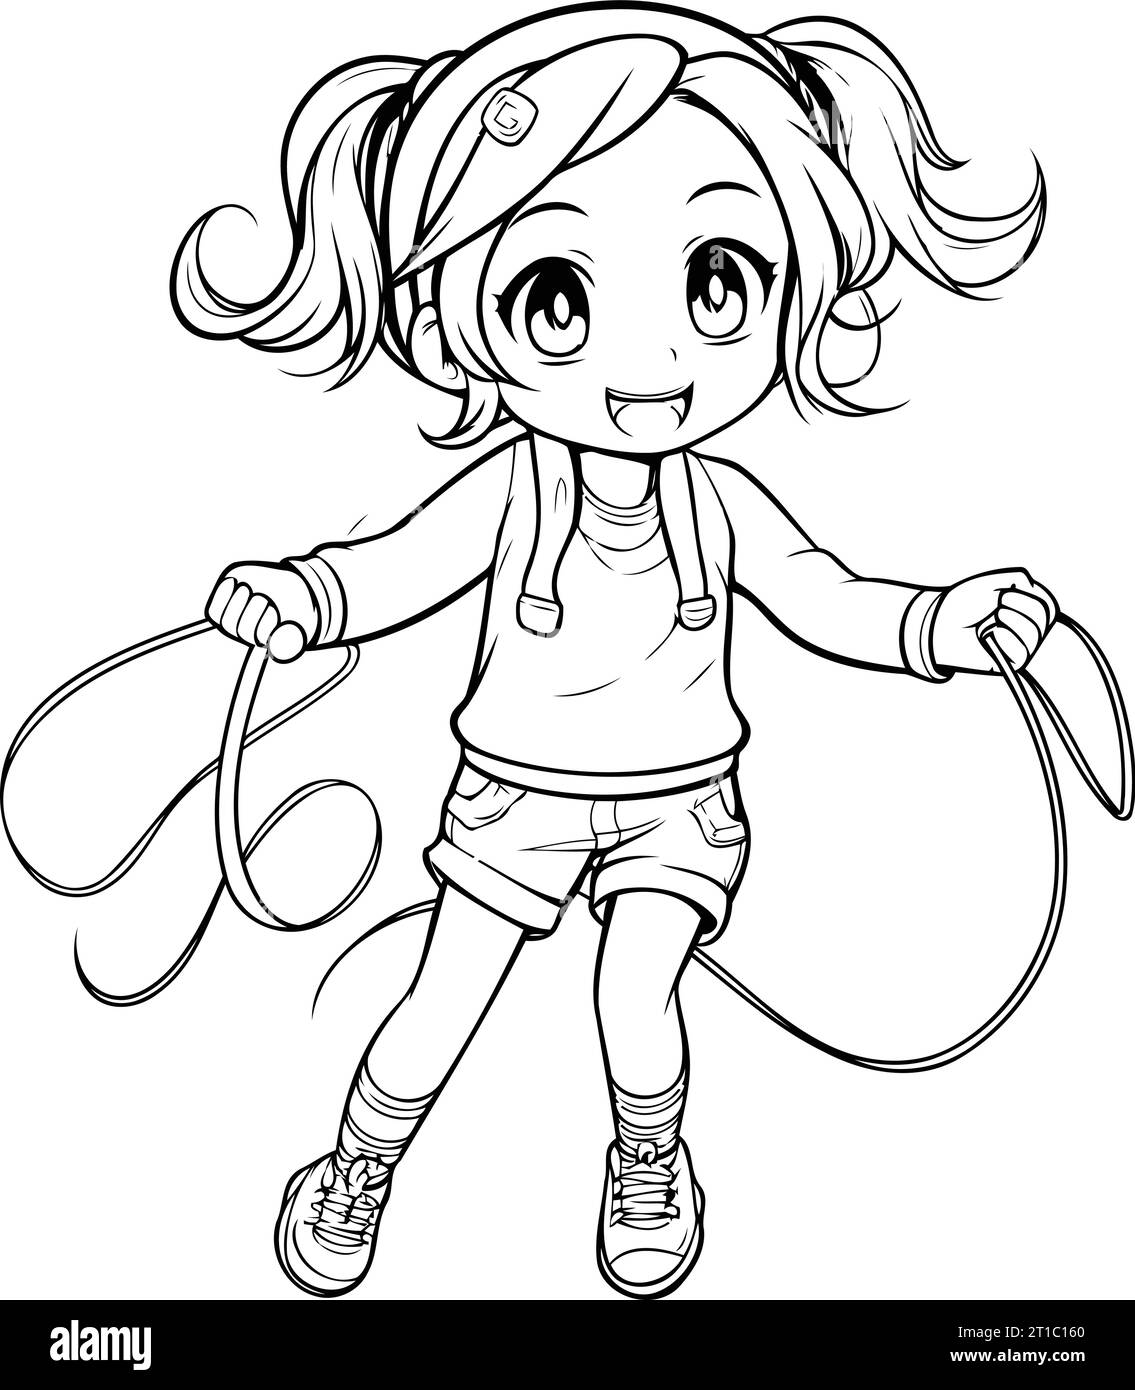 Coloring Page Outline Of a Cute Little Girl Skipping Rope Stock Vector